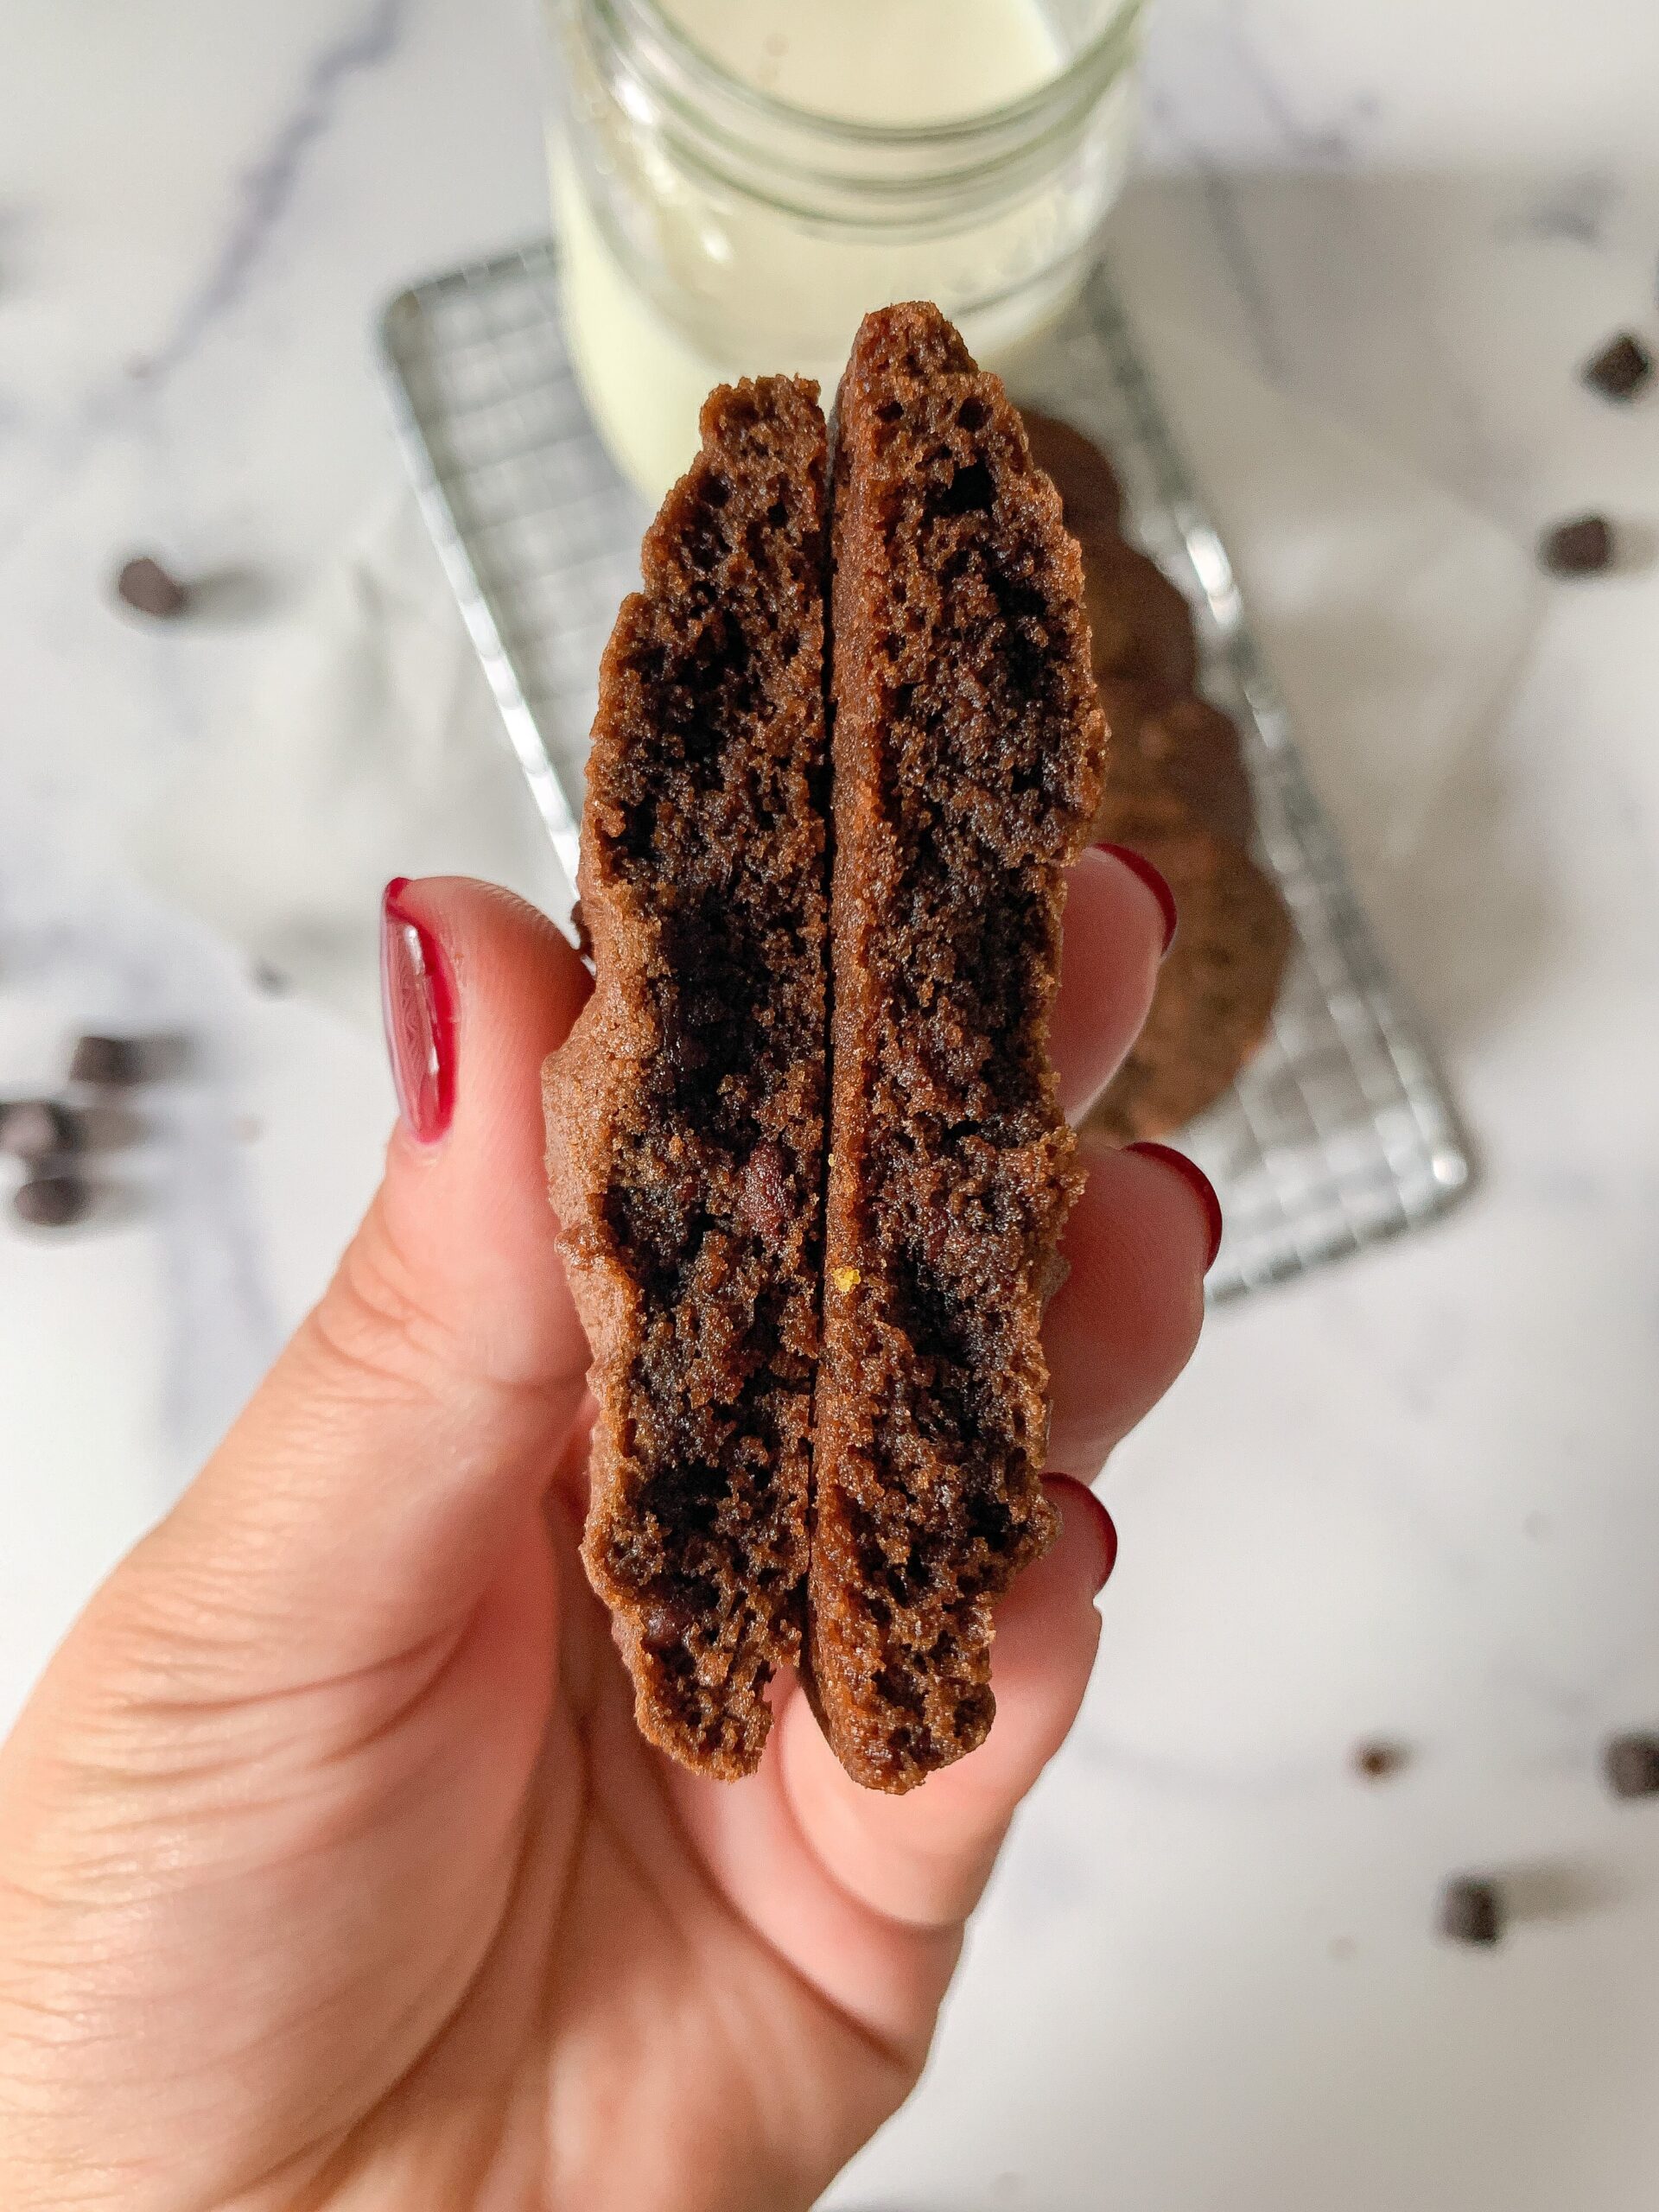 inside of a chocolate cookie held in a hand